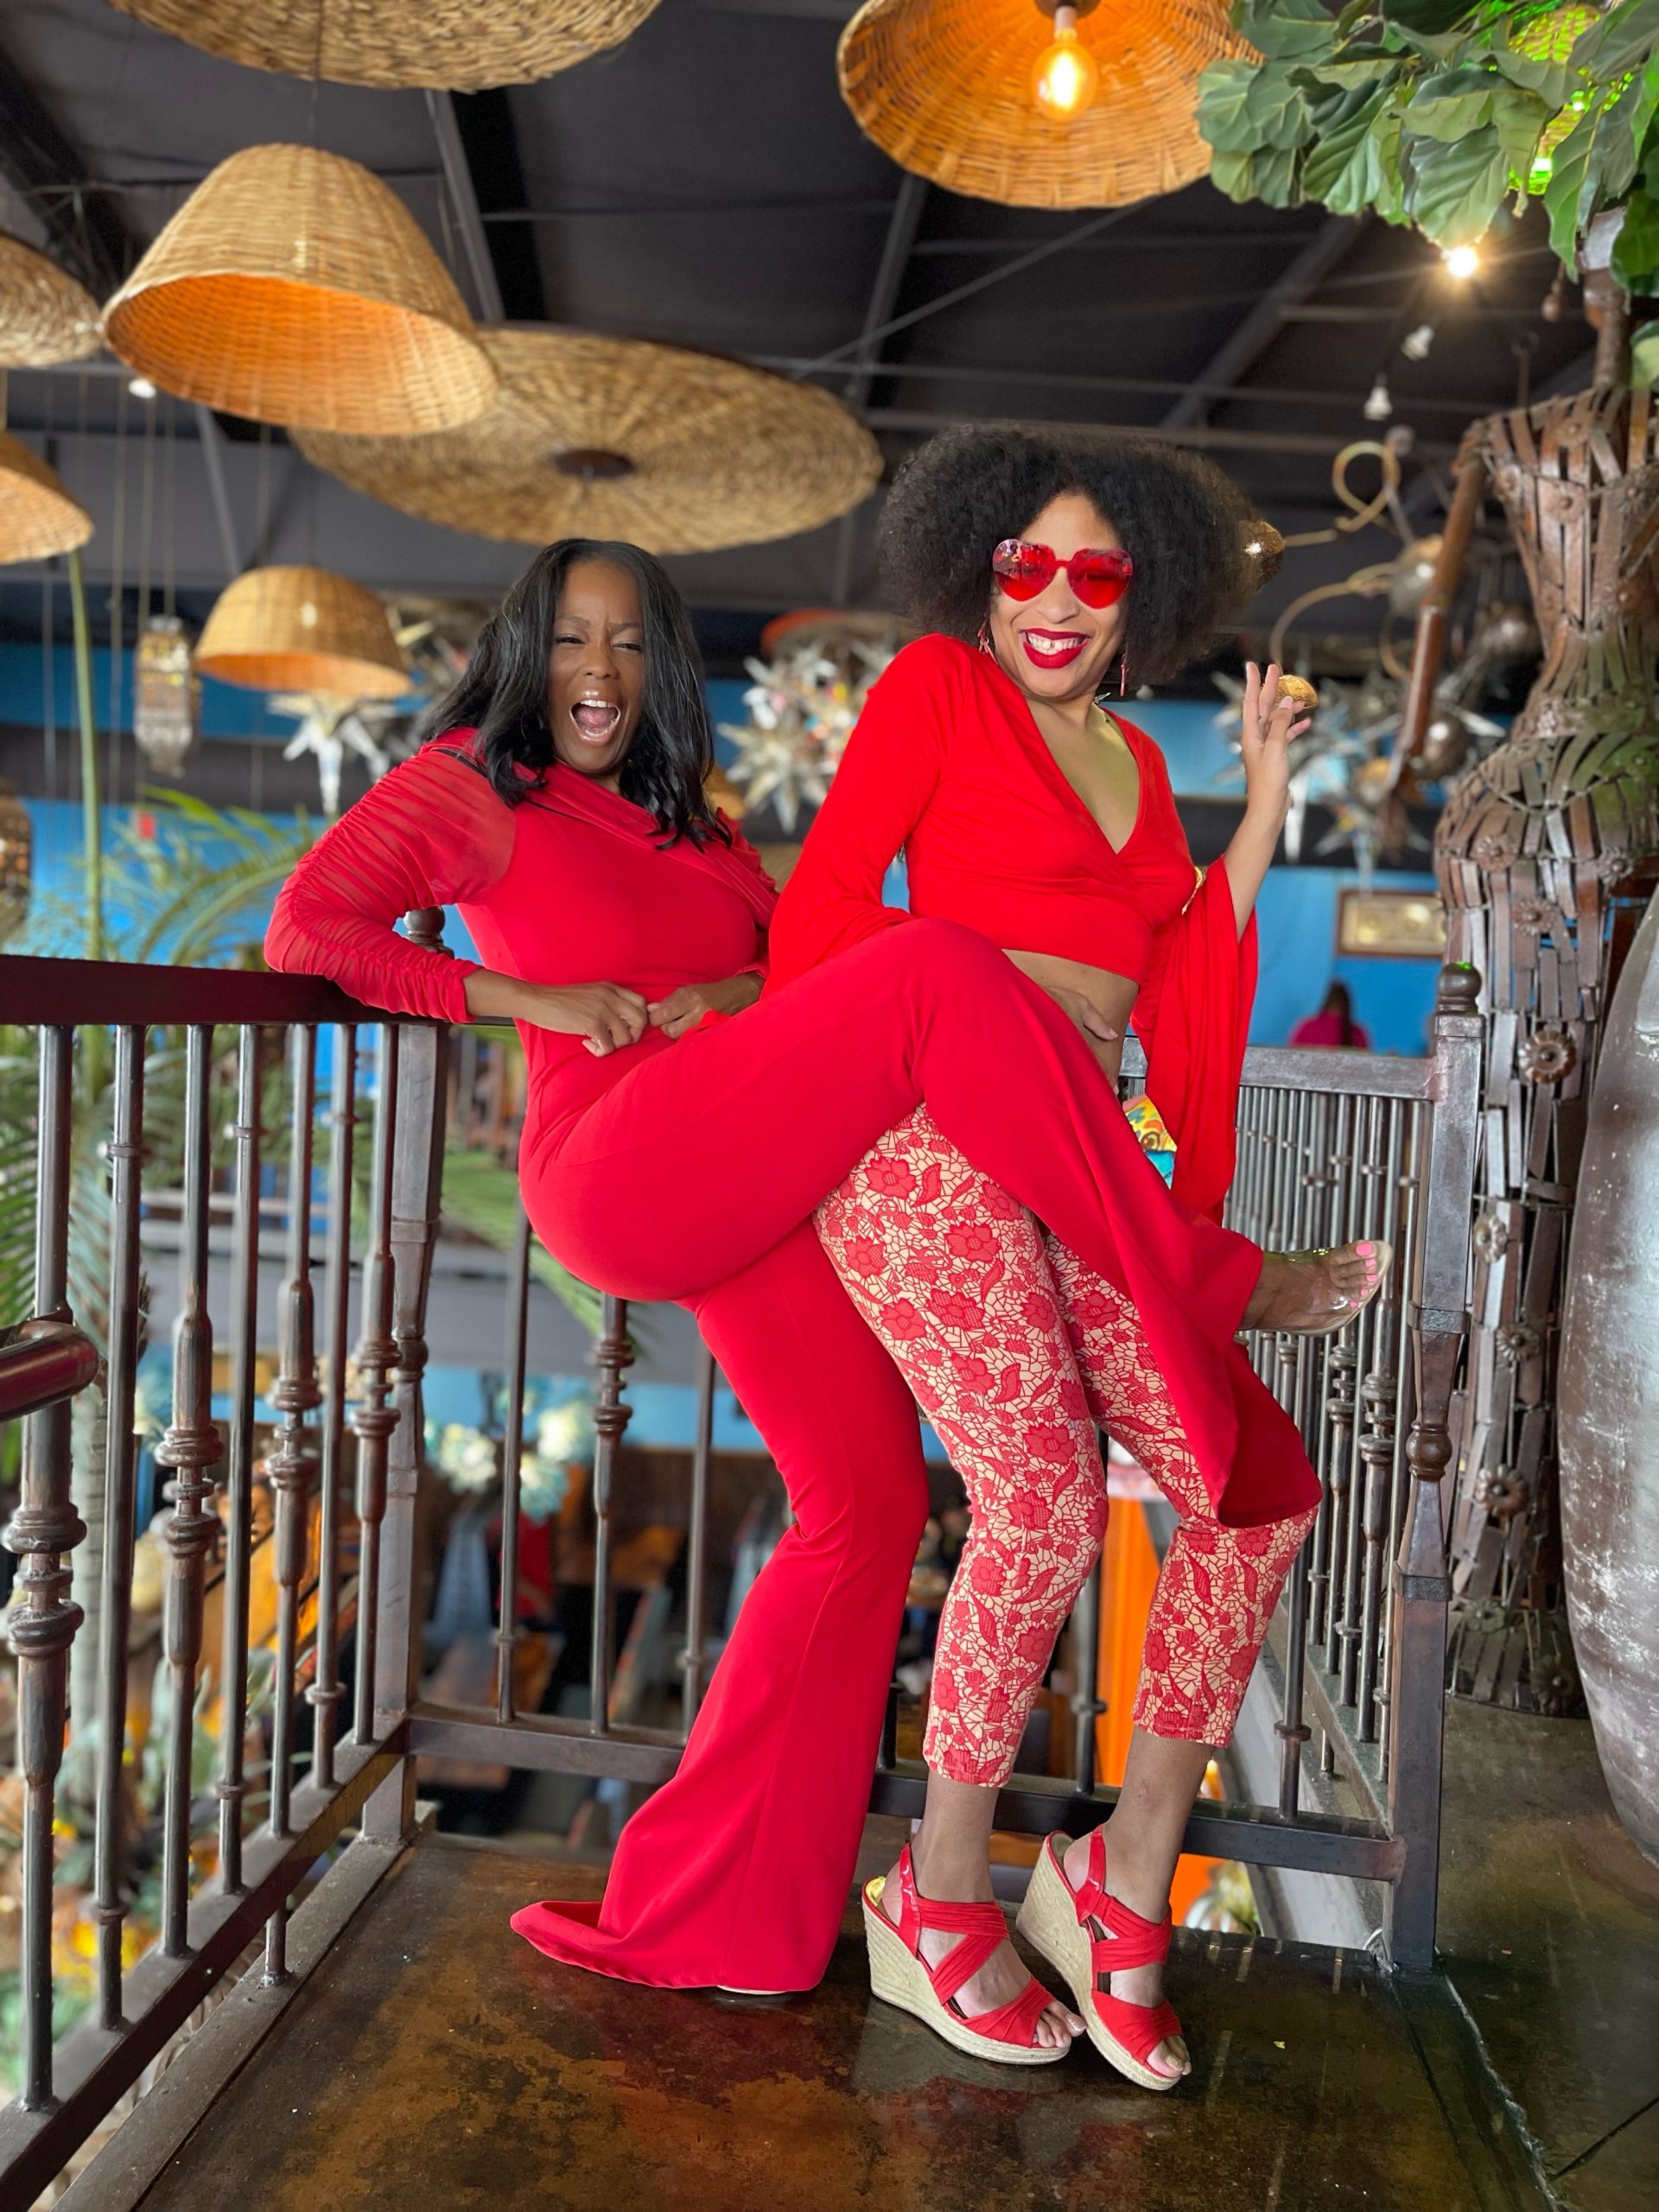 Kiwi The Beauty’s 10th Annual ‘Groovy Galentine’s Day’ Brunch